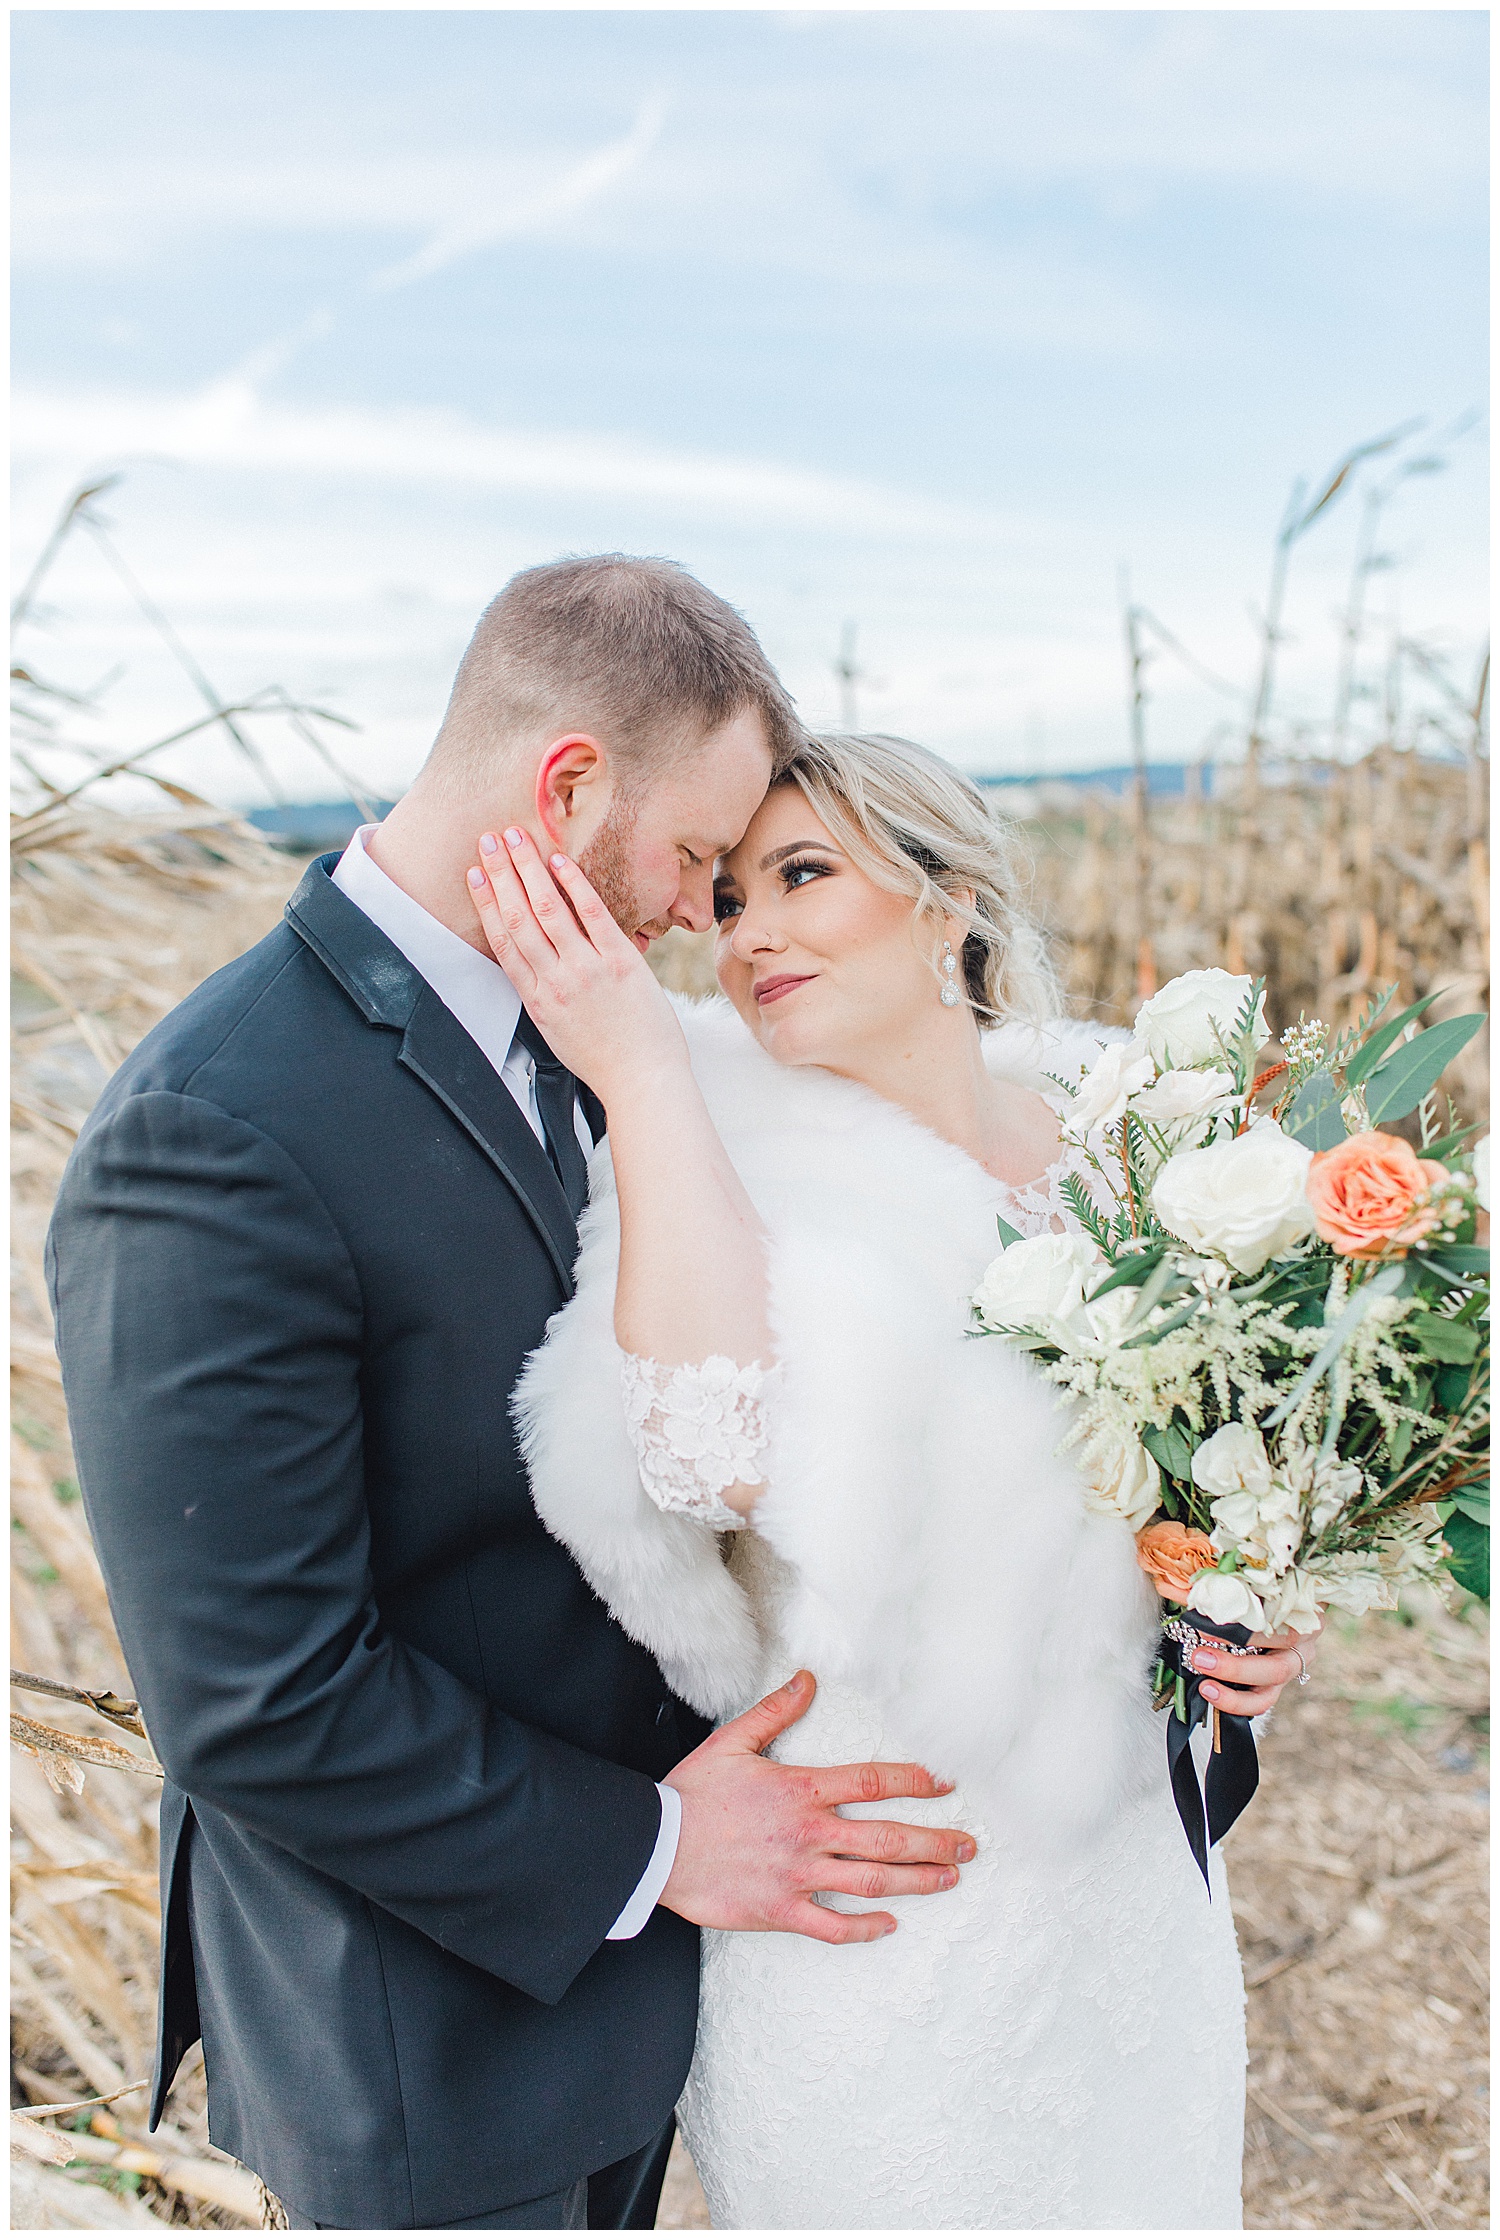 ERC-7514_A beautiful winter wedding in Snohomish, Washington at Thomas Family Farm was simply perfect.  This rustic and modern styled wedding was dripping with romance and photographed by Emma Rose Company, a pacific northwest wedding photographer..jpg